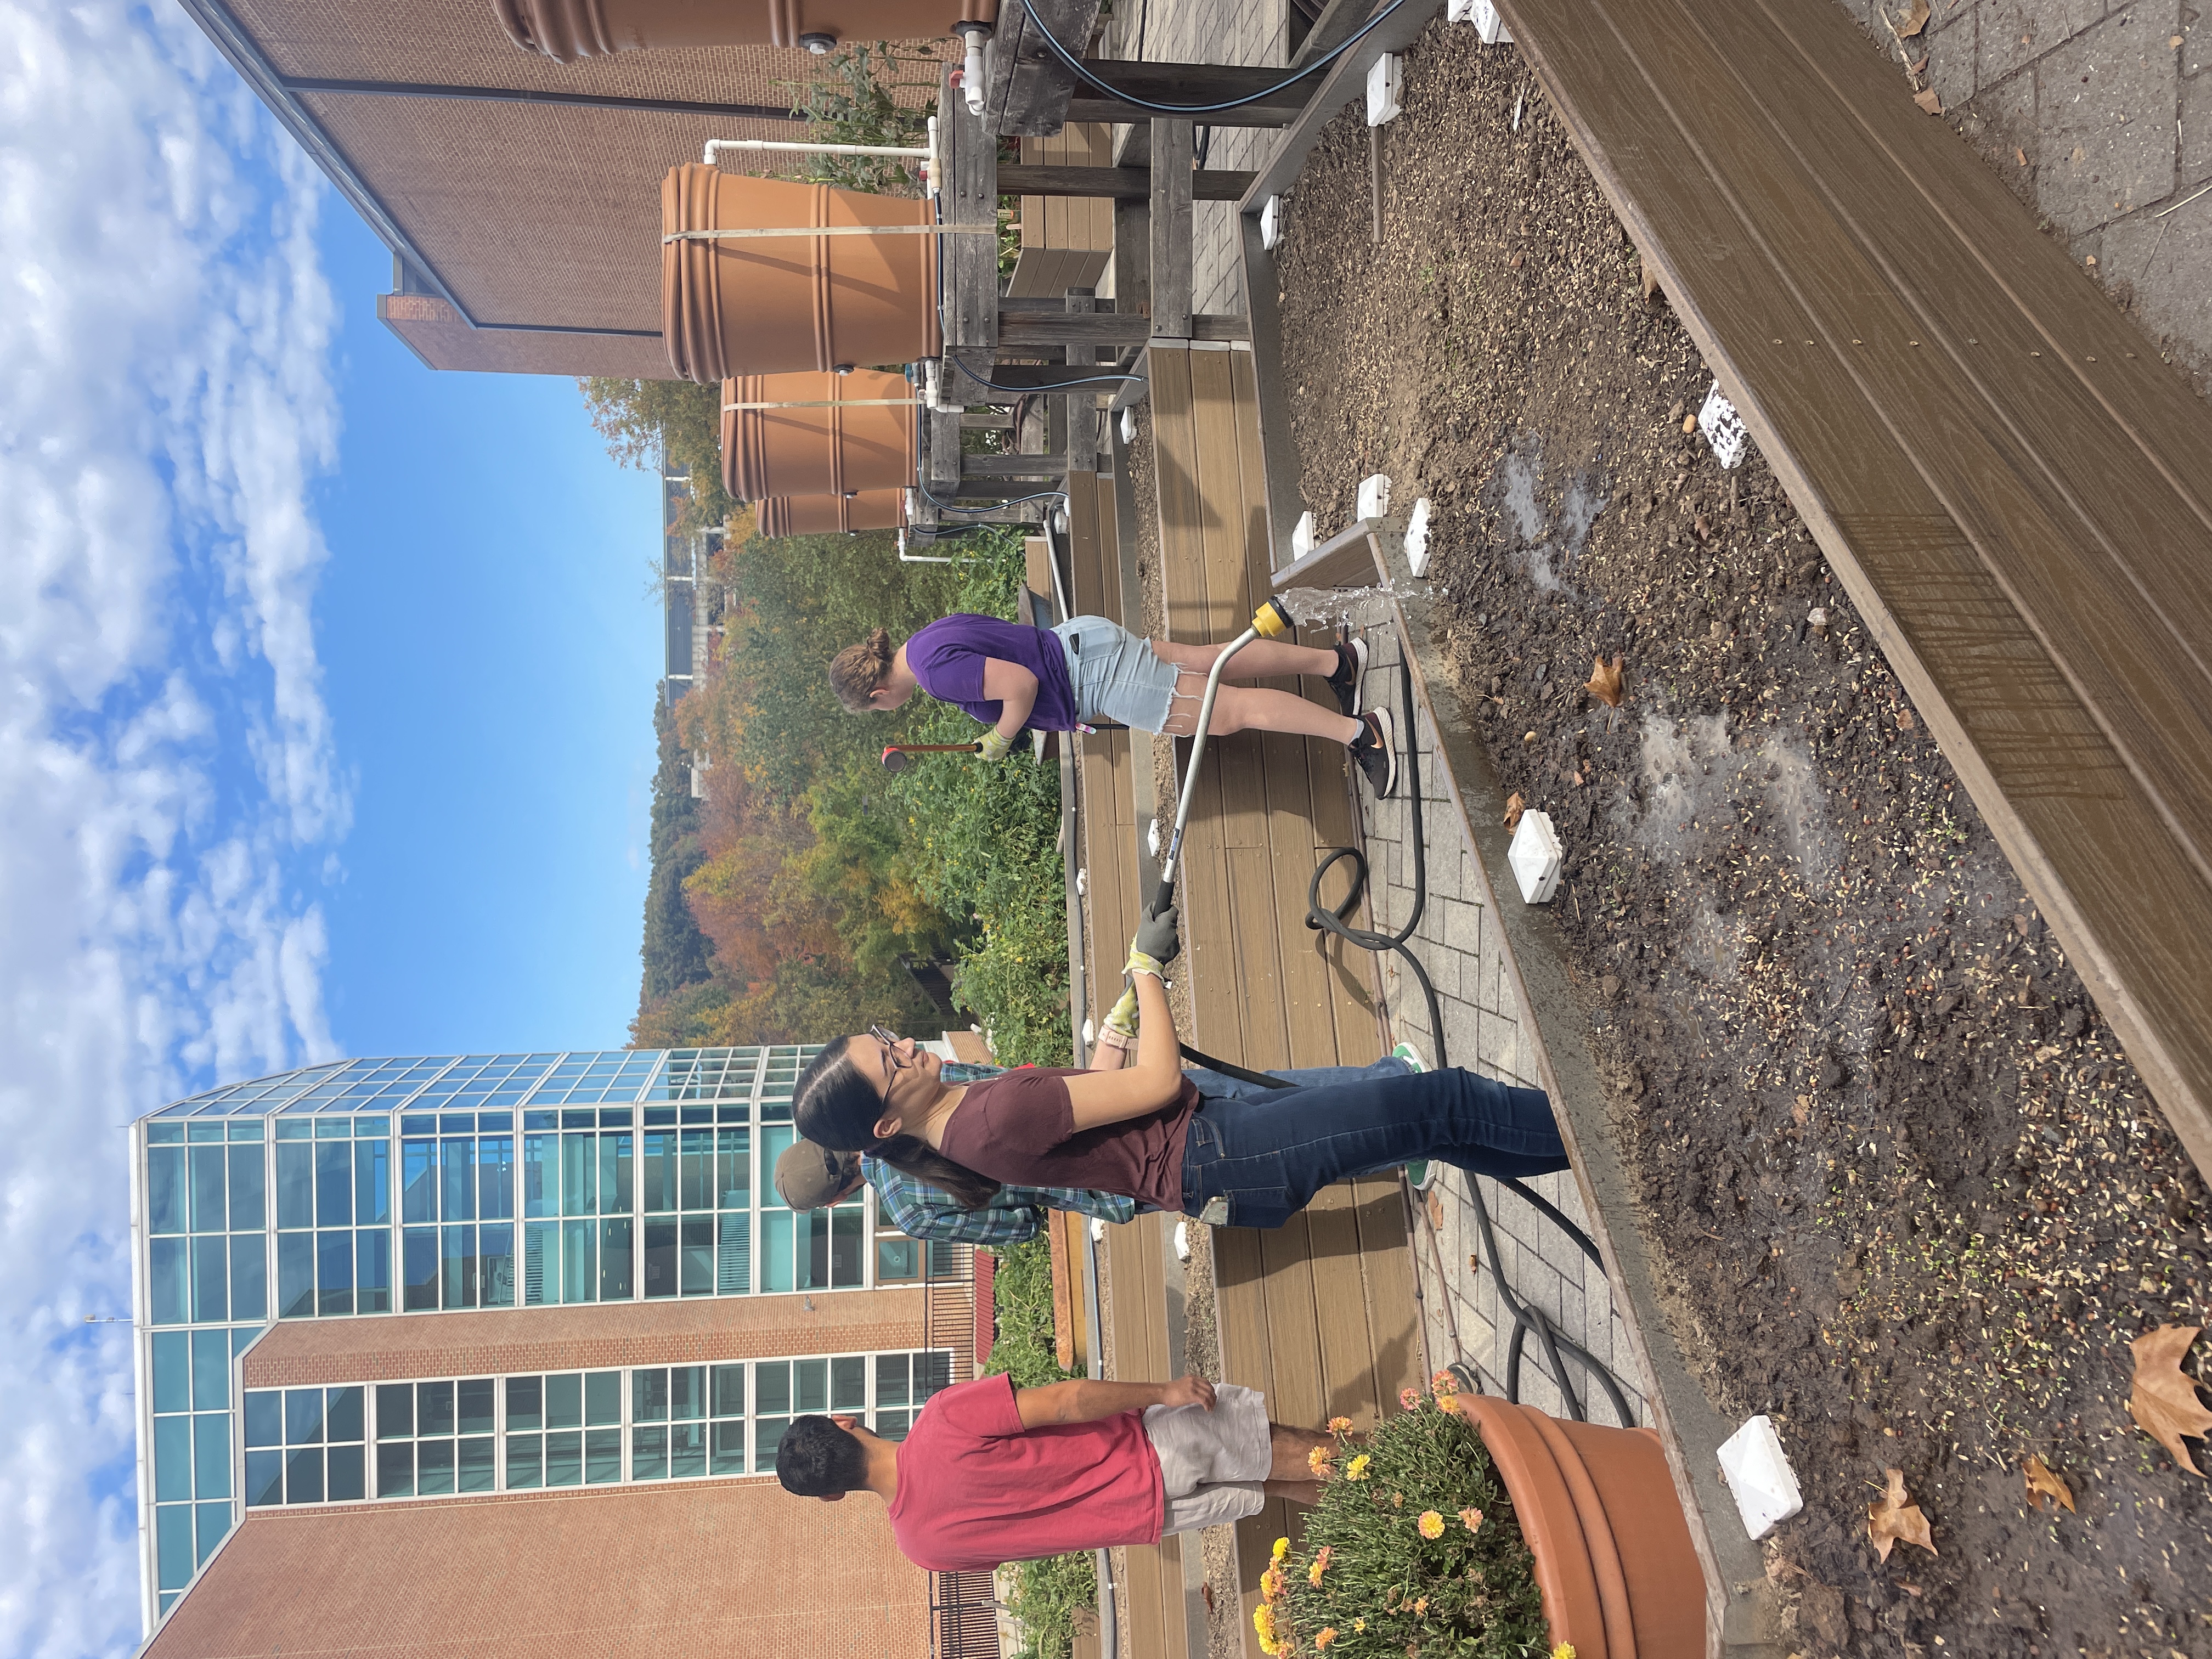 Student watering raised bed in community learning garden while others lay out seeds